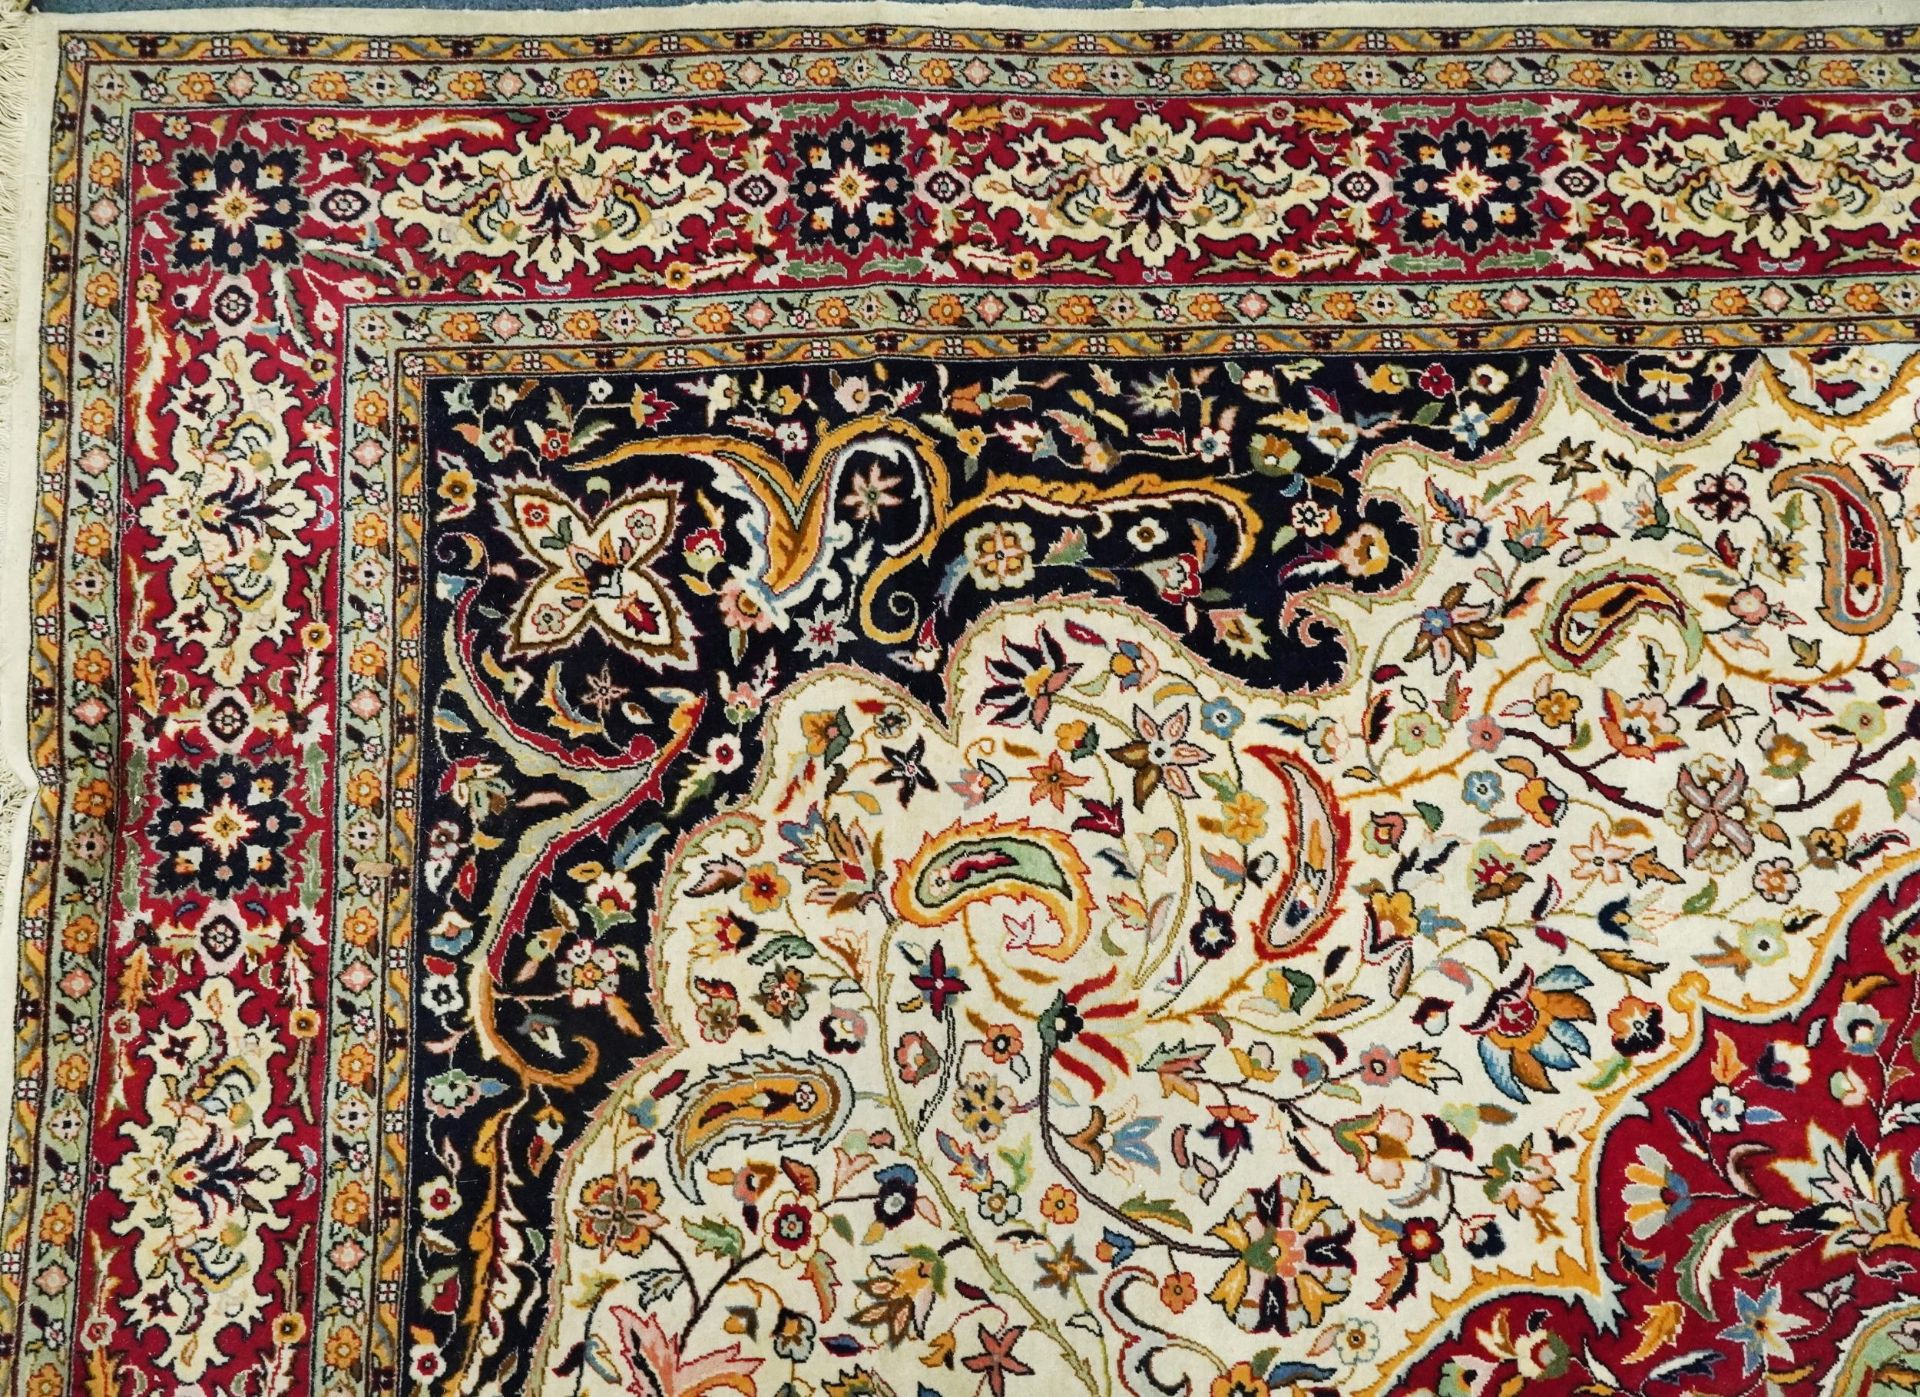 Rectangular Persian cream and red ground rug having an all over repeat floral design, 370cm x 270cm - Image 2 of 12